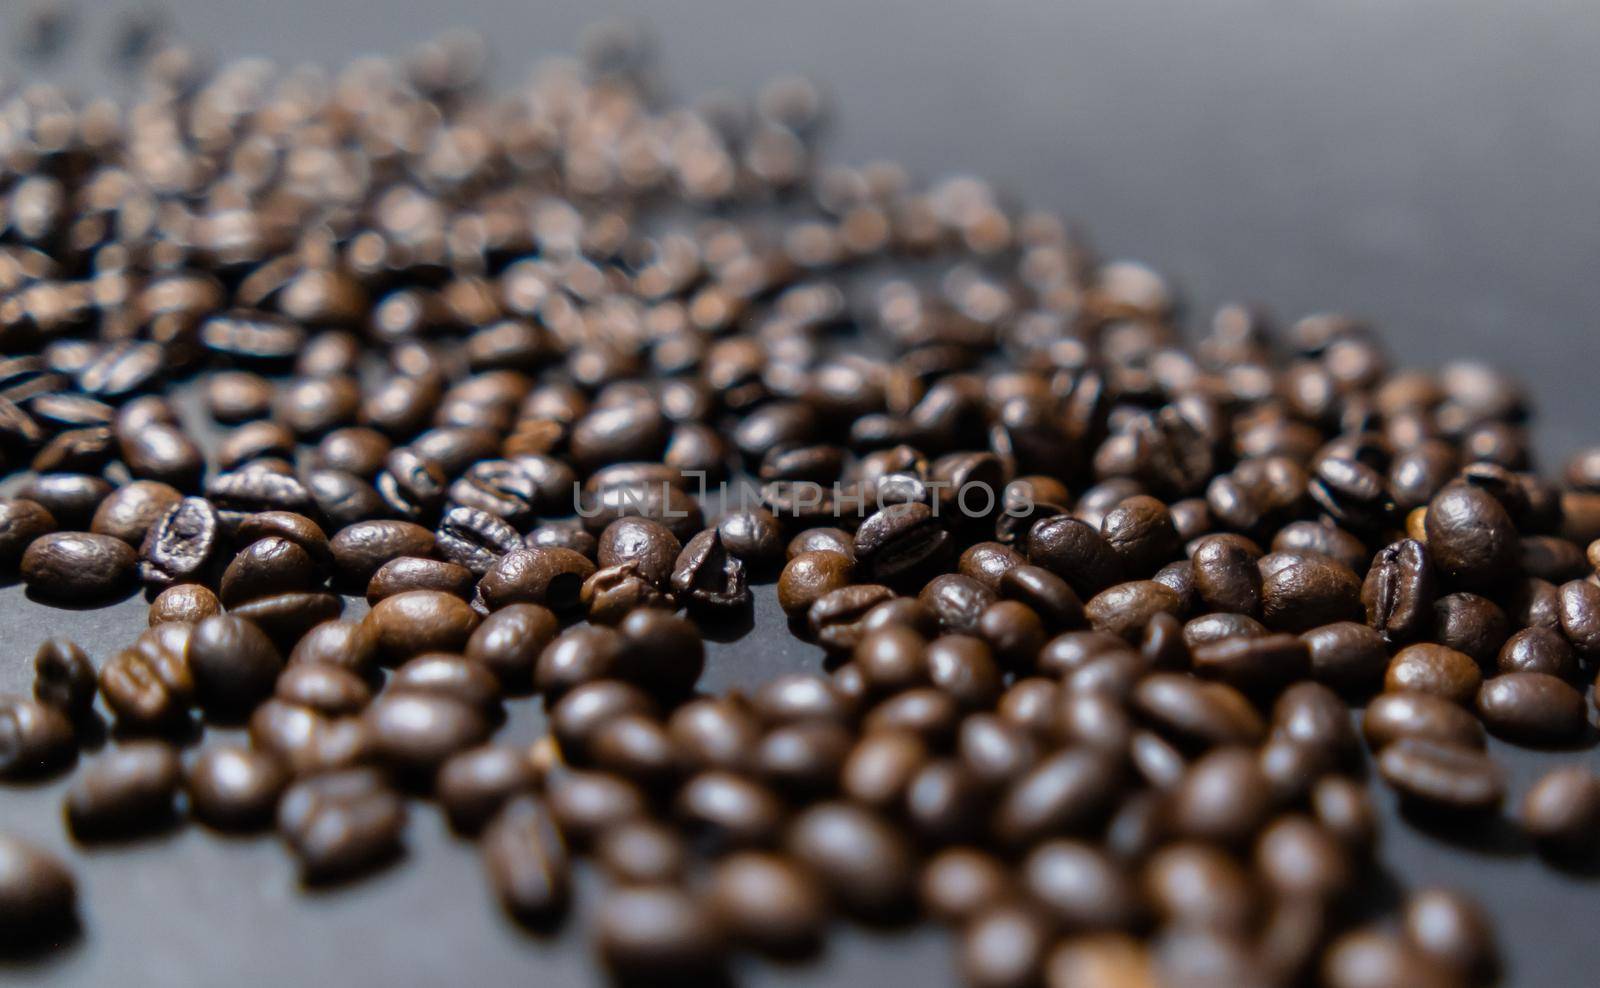 Close-up of small pile of roasted coffee beans with dark gray background. Group of coffee grains scattered on dark color surface. Caffeine and drink preparation